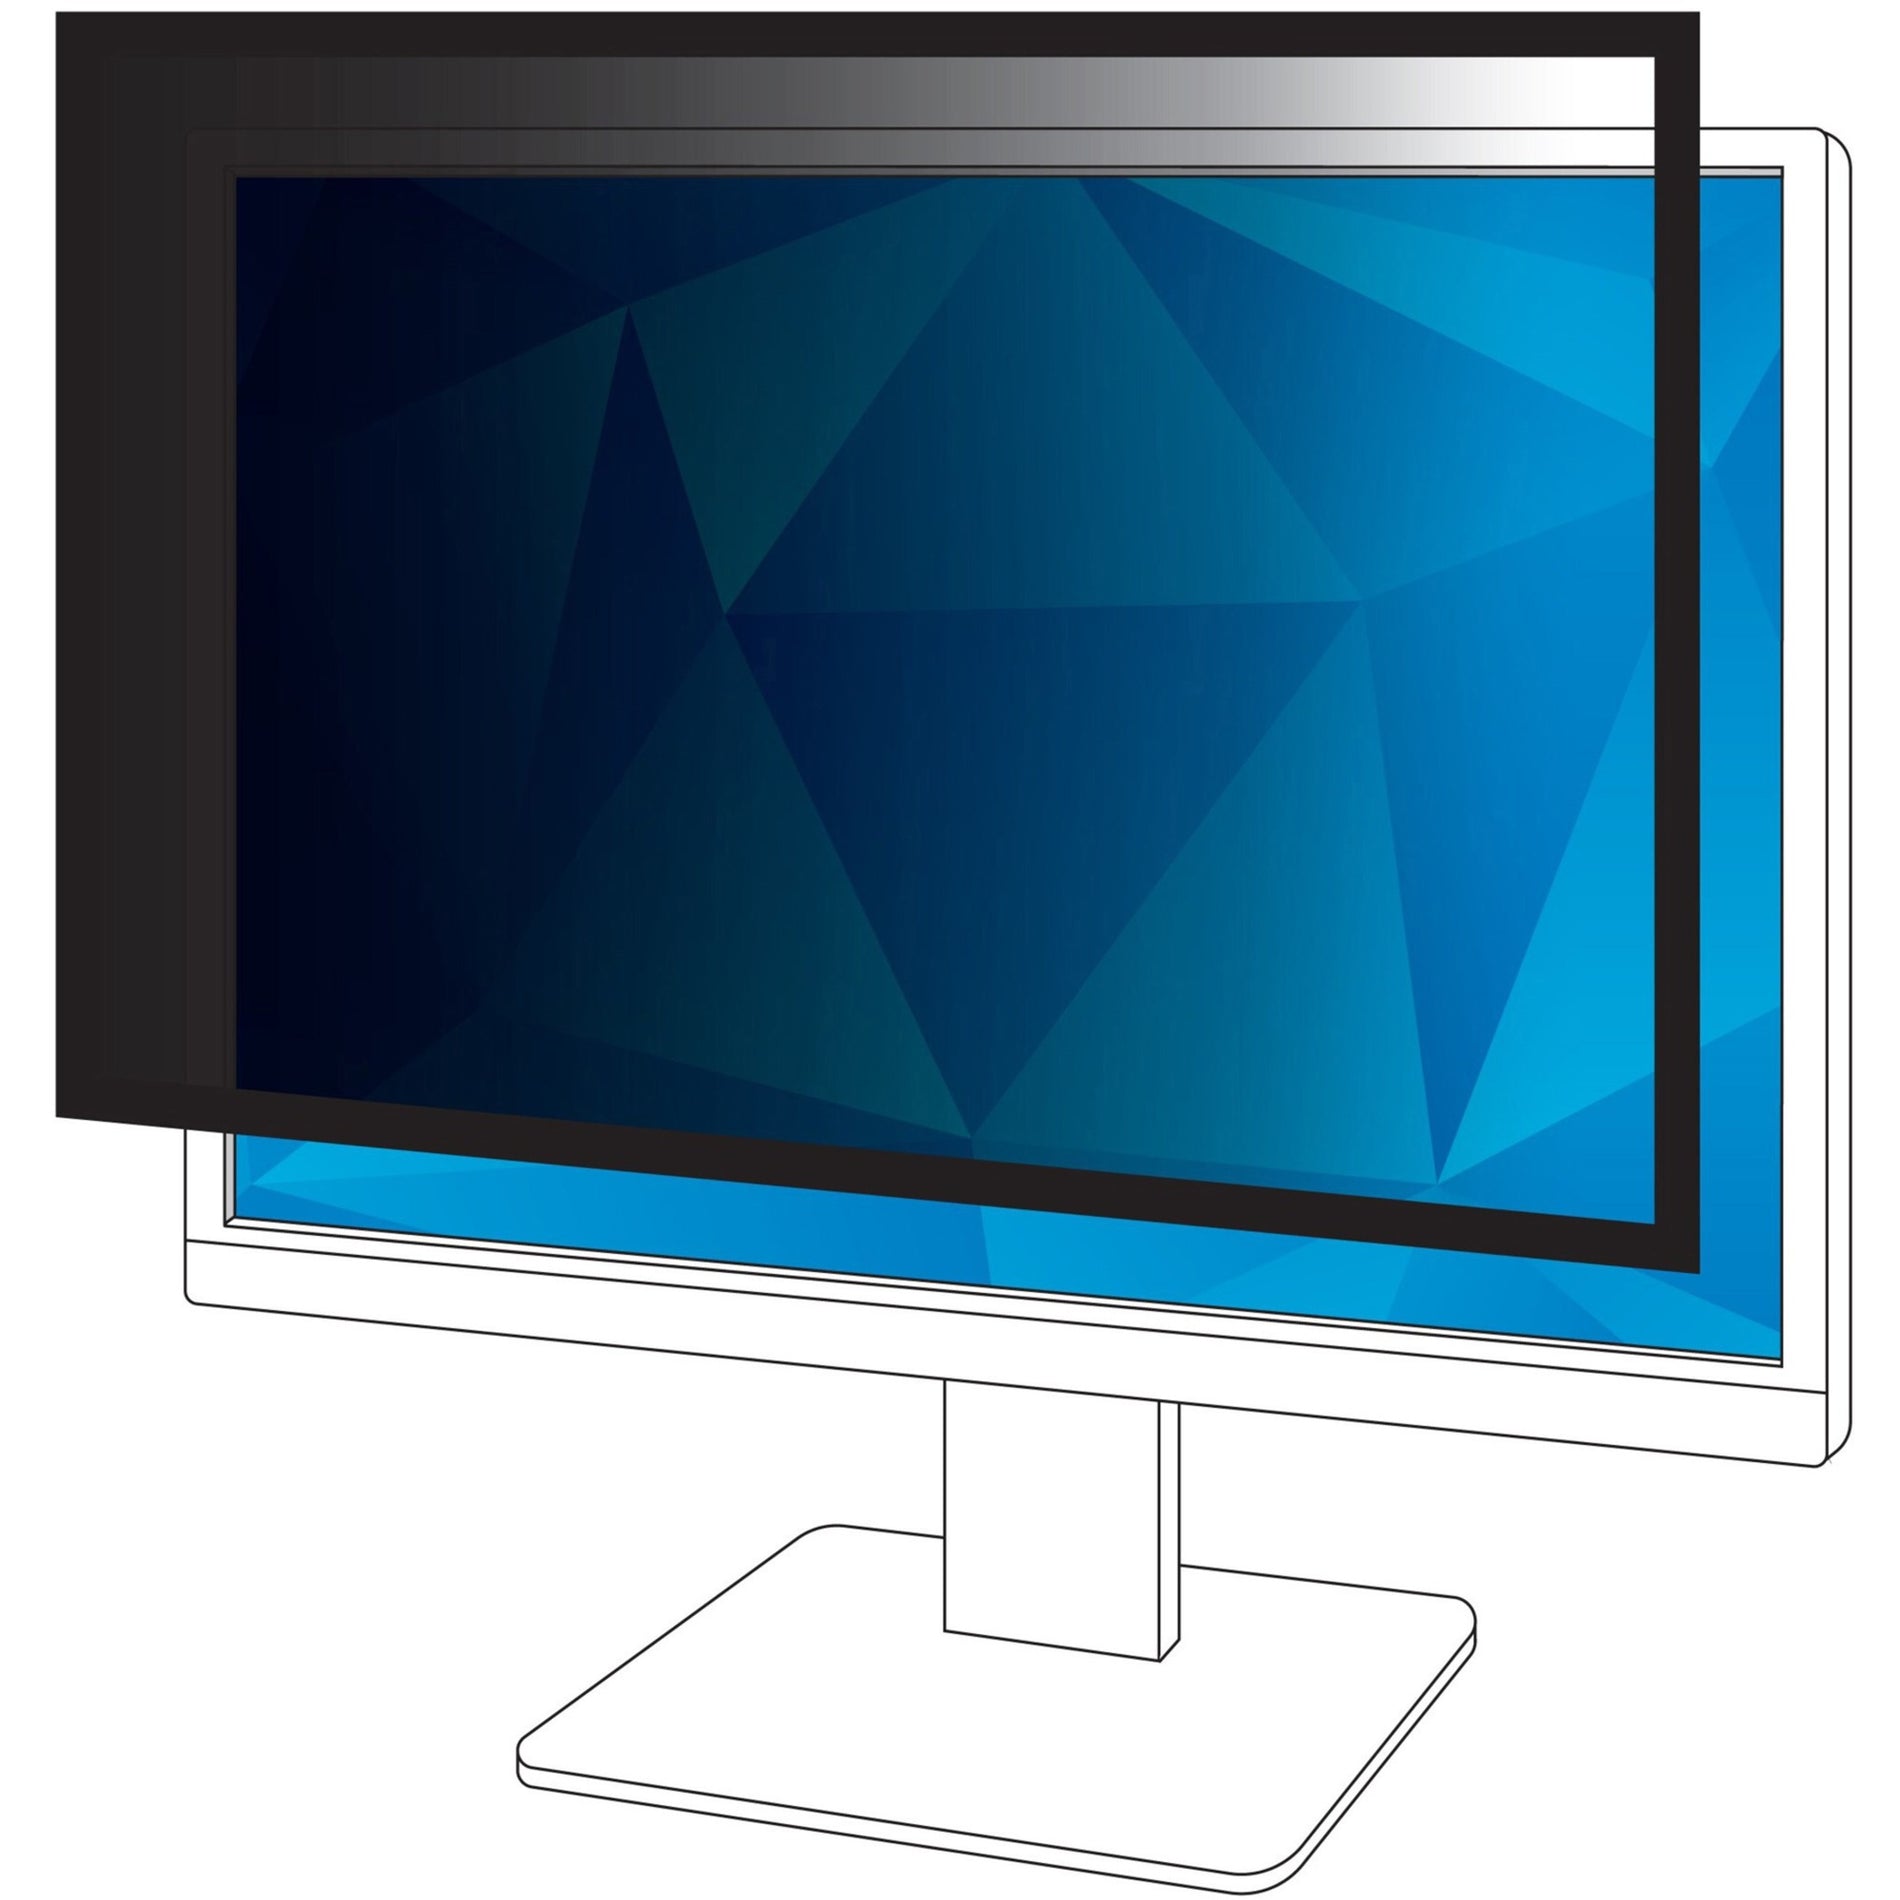 3M PF240W9F Framed Privacy Filter Black, 24" Widescreen, Easy Application and Removal, Blue Light Reduction